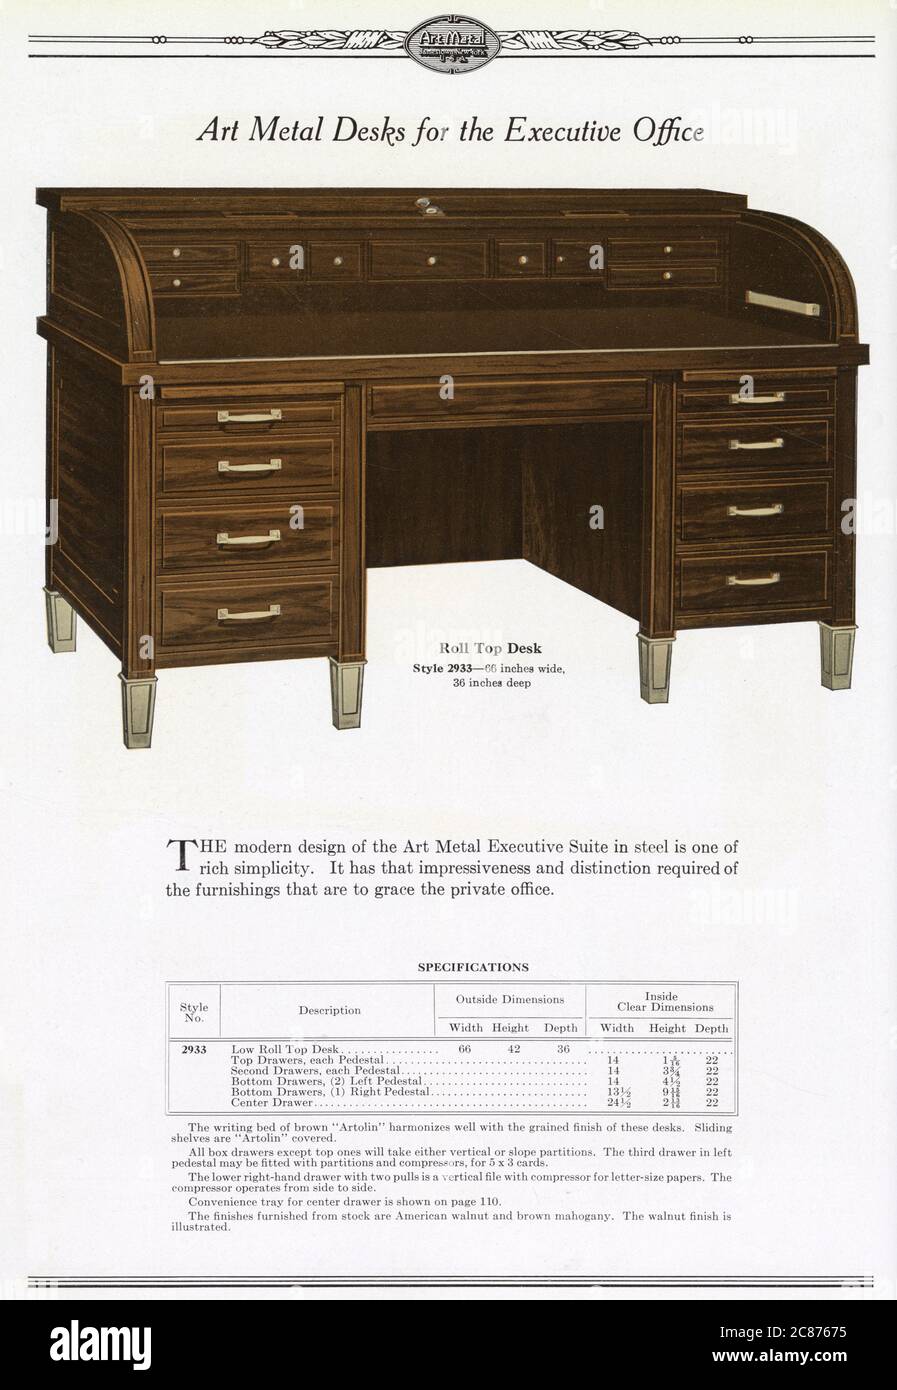 Art Metal Steel Office Equipment, Jamestown, New York, USA - Art Metal Roll Top Desk for the Executive Office, seen here with Mahogany finish. Stock Photo